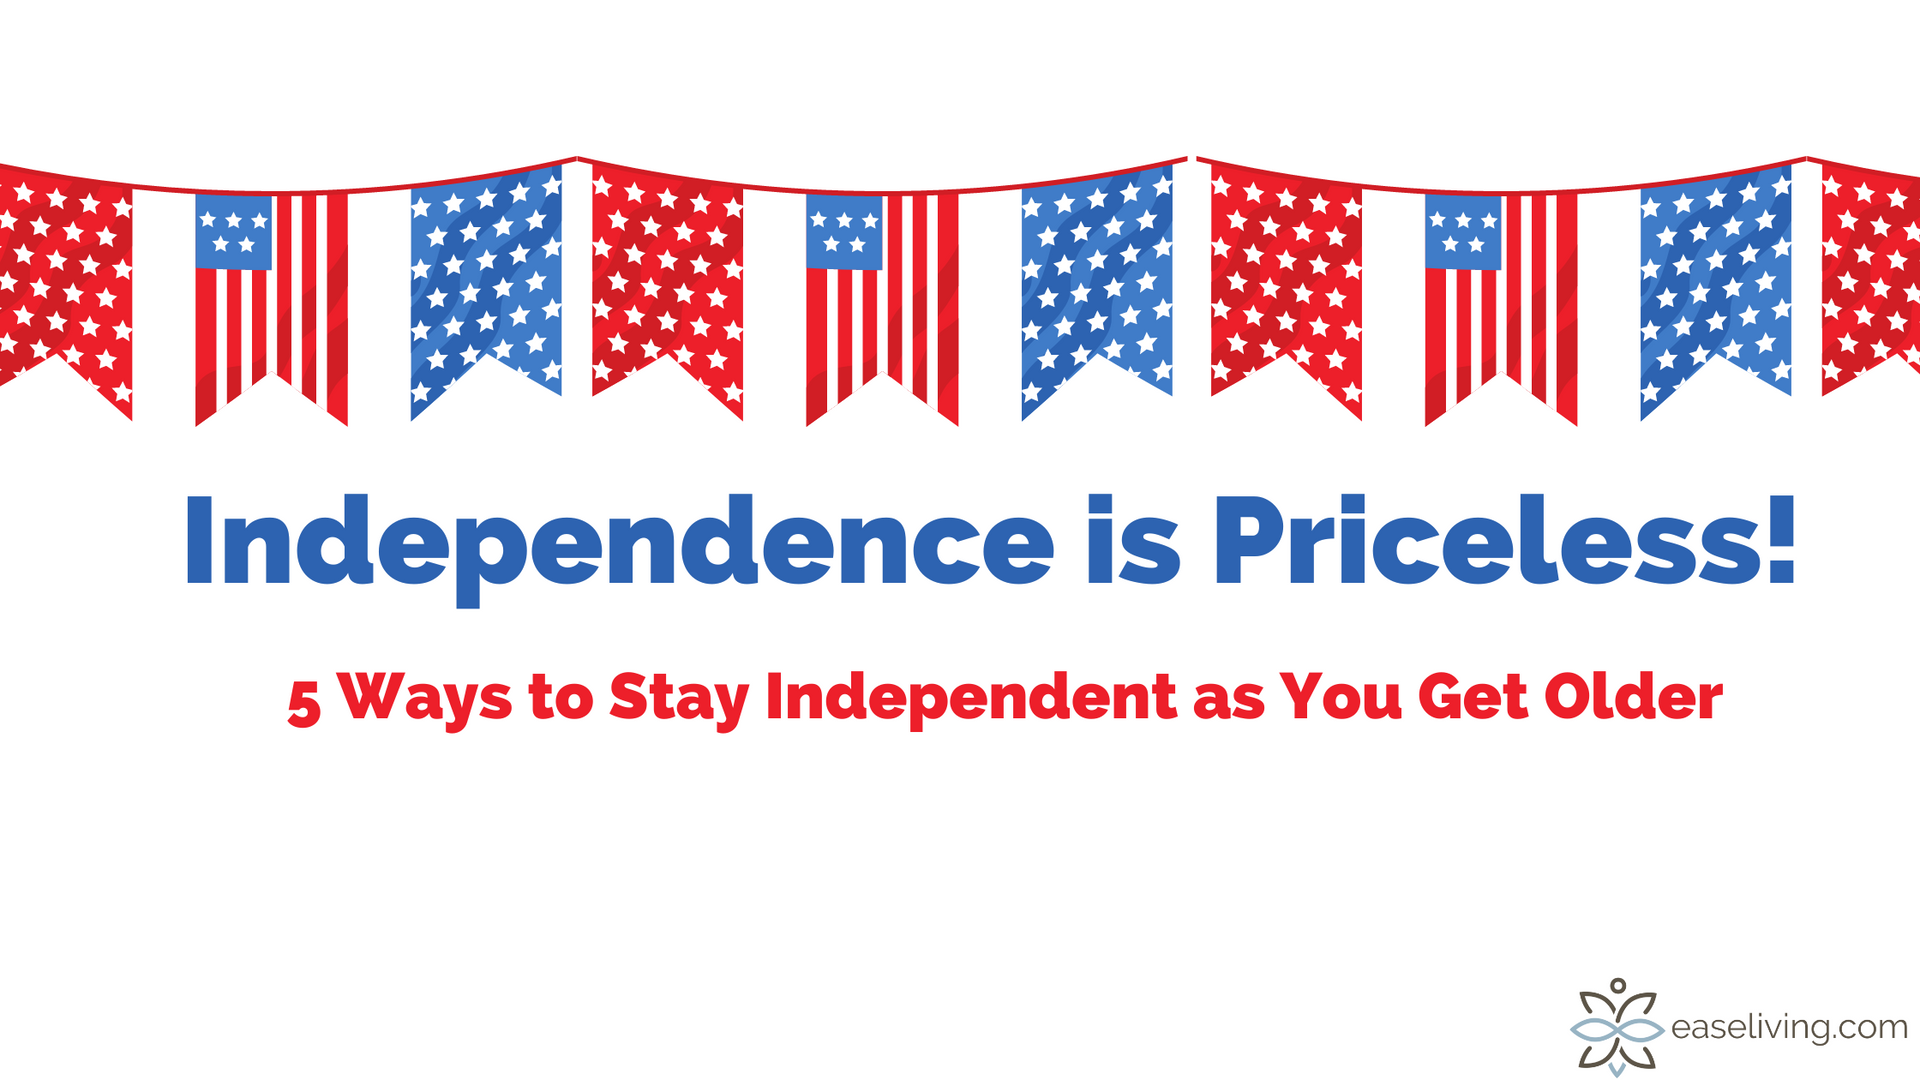 5 Ways to Stay Independent as You Get Older